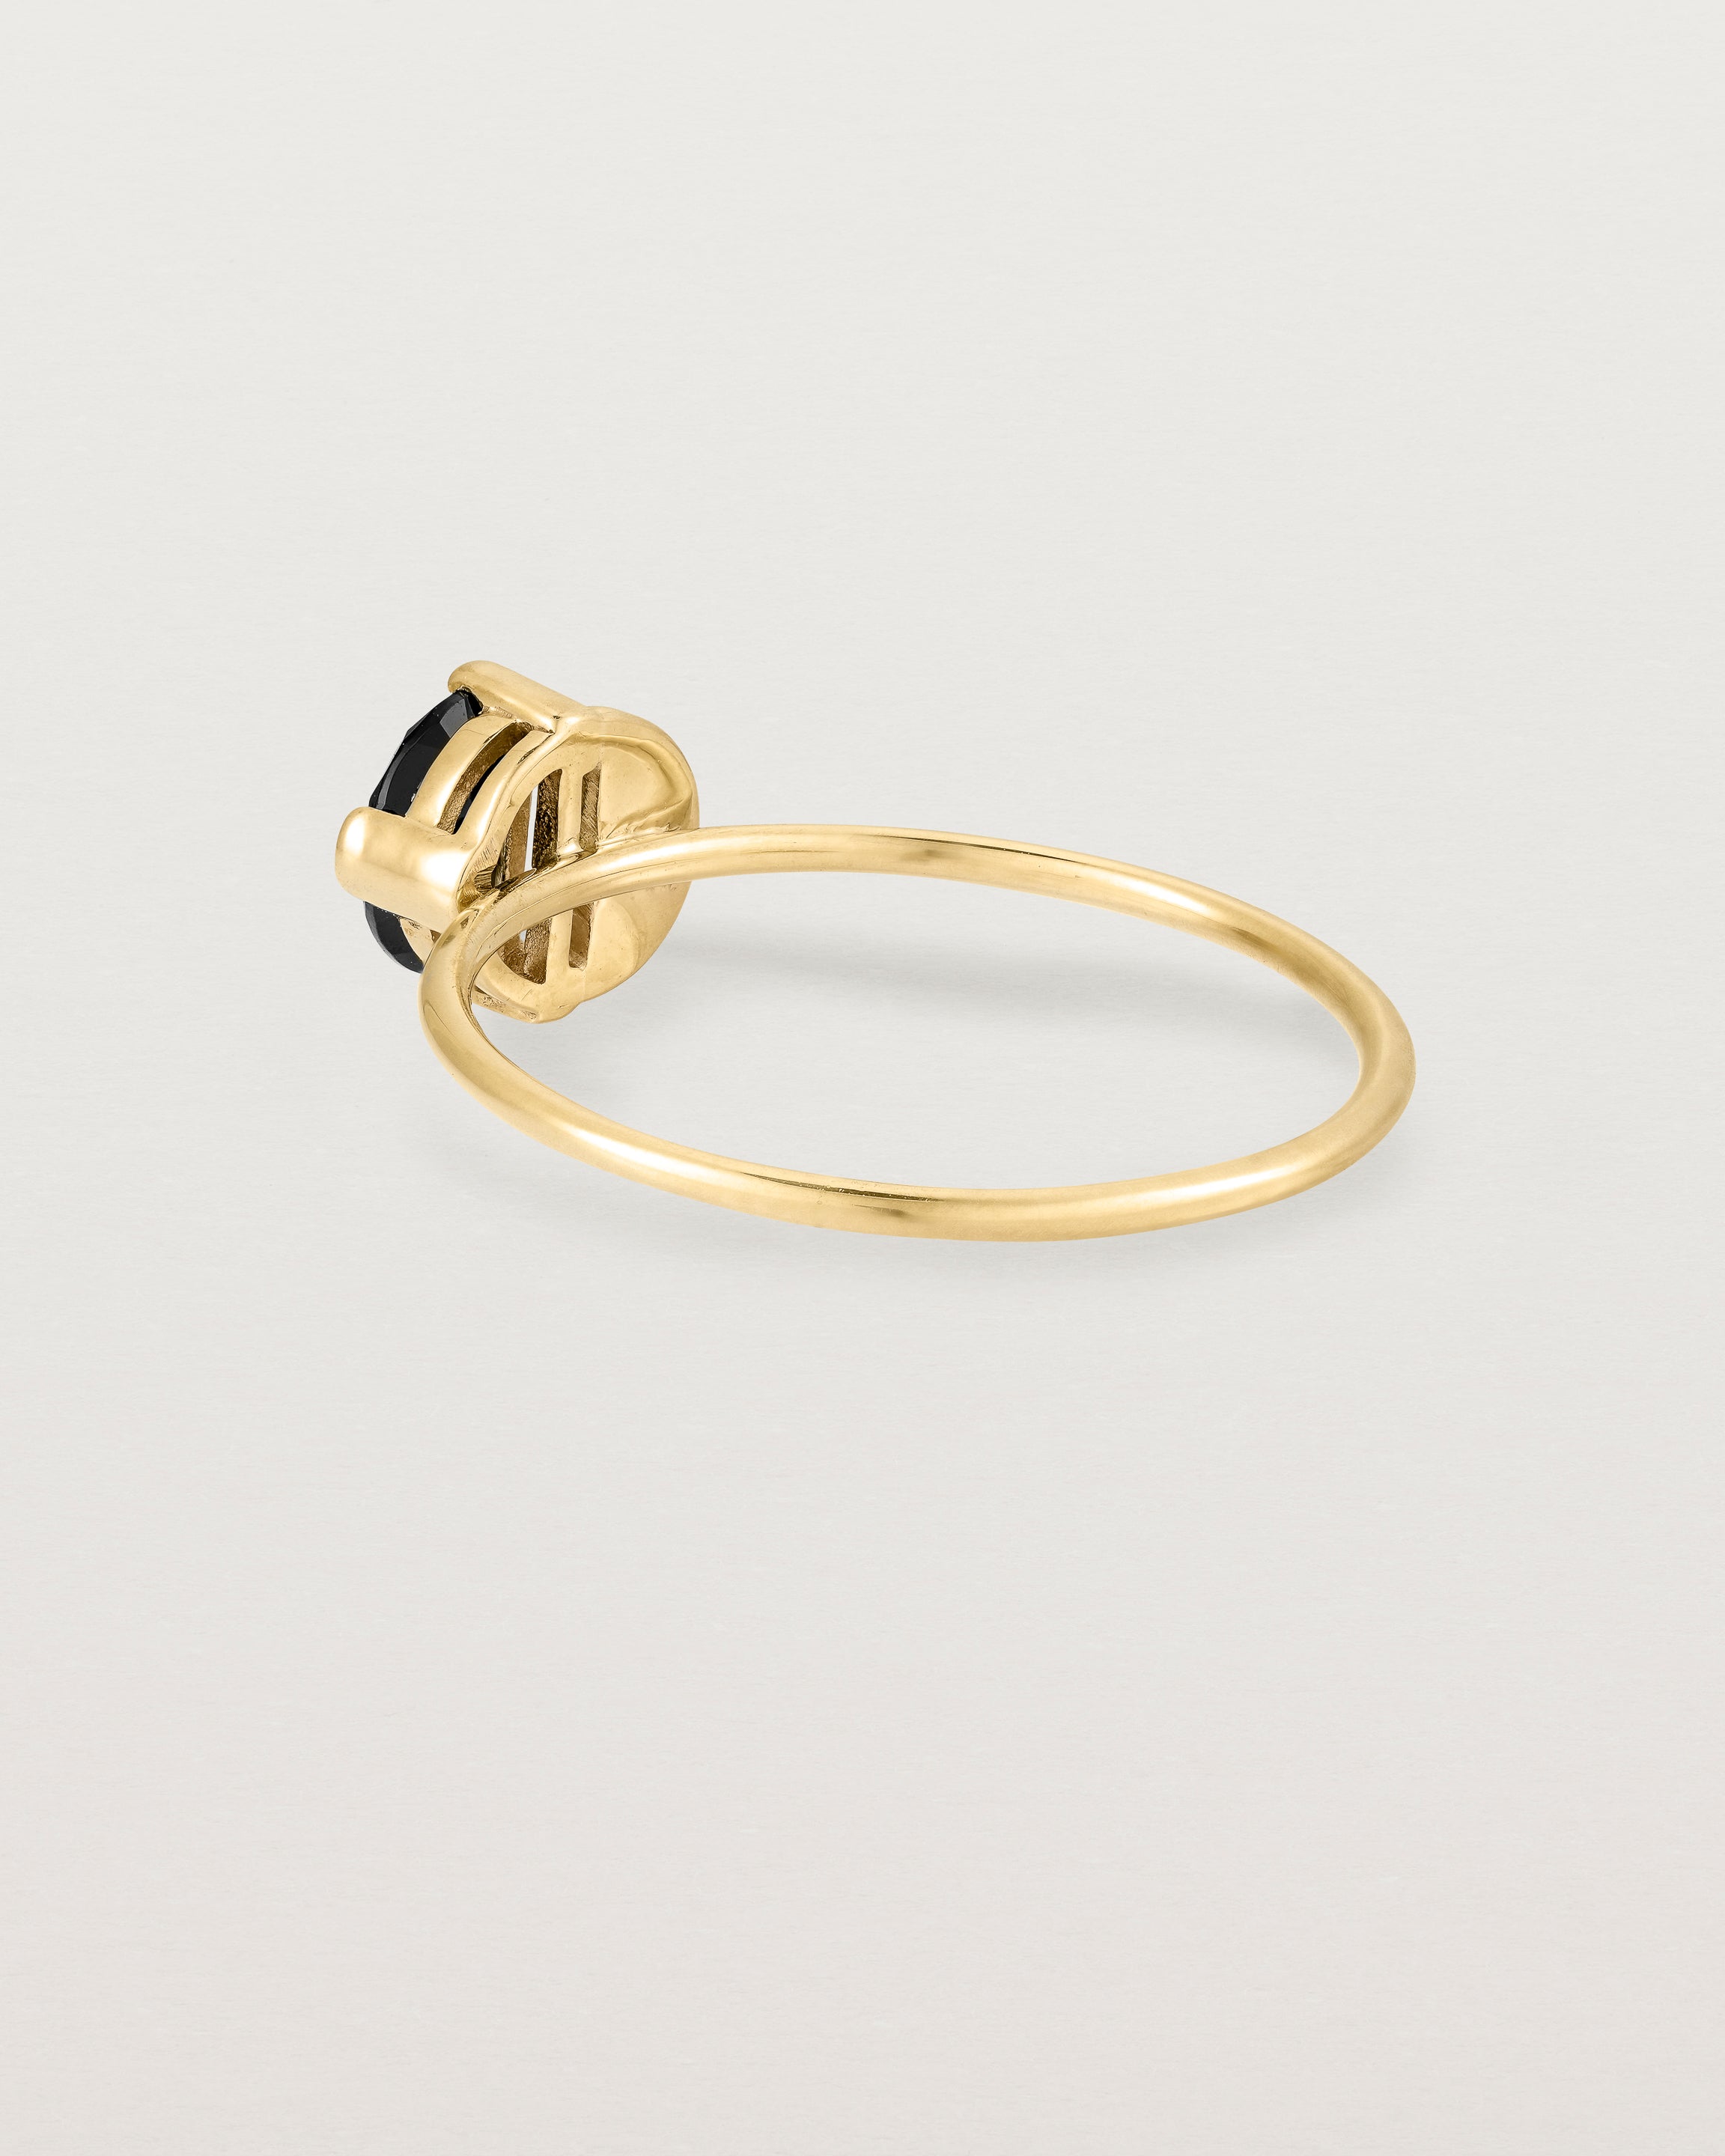 Back view of the Jia Stone Ring | Black Spinel in Yellow Gold.